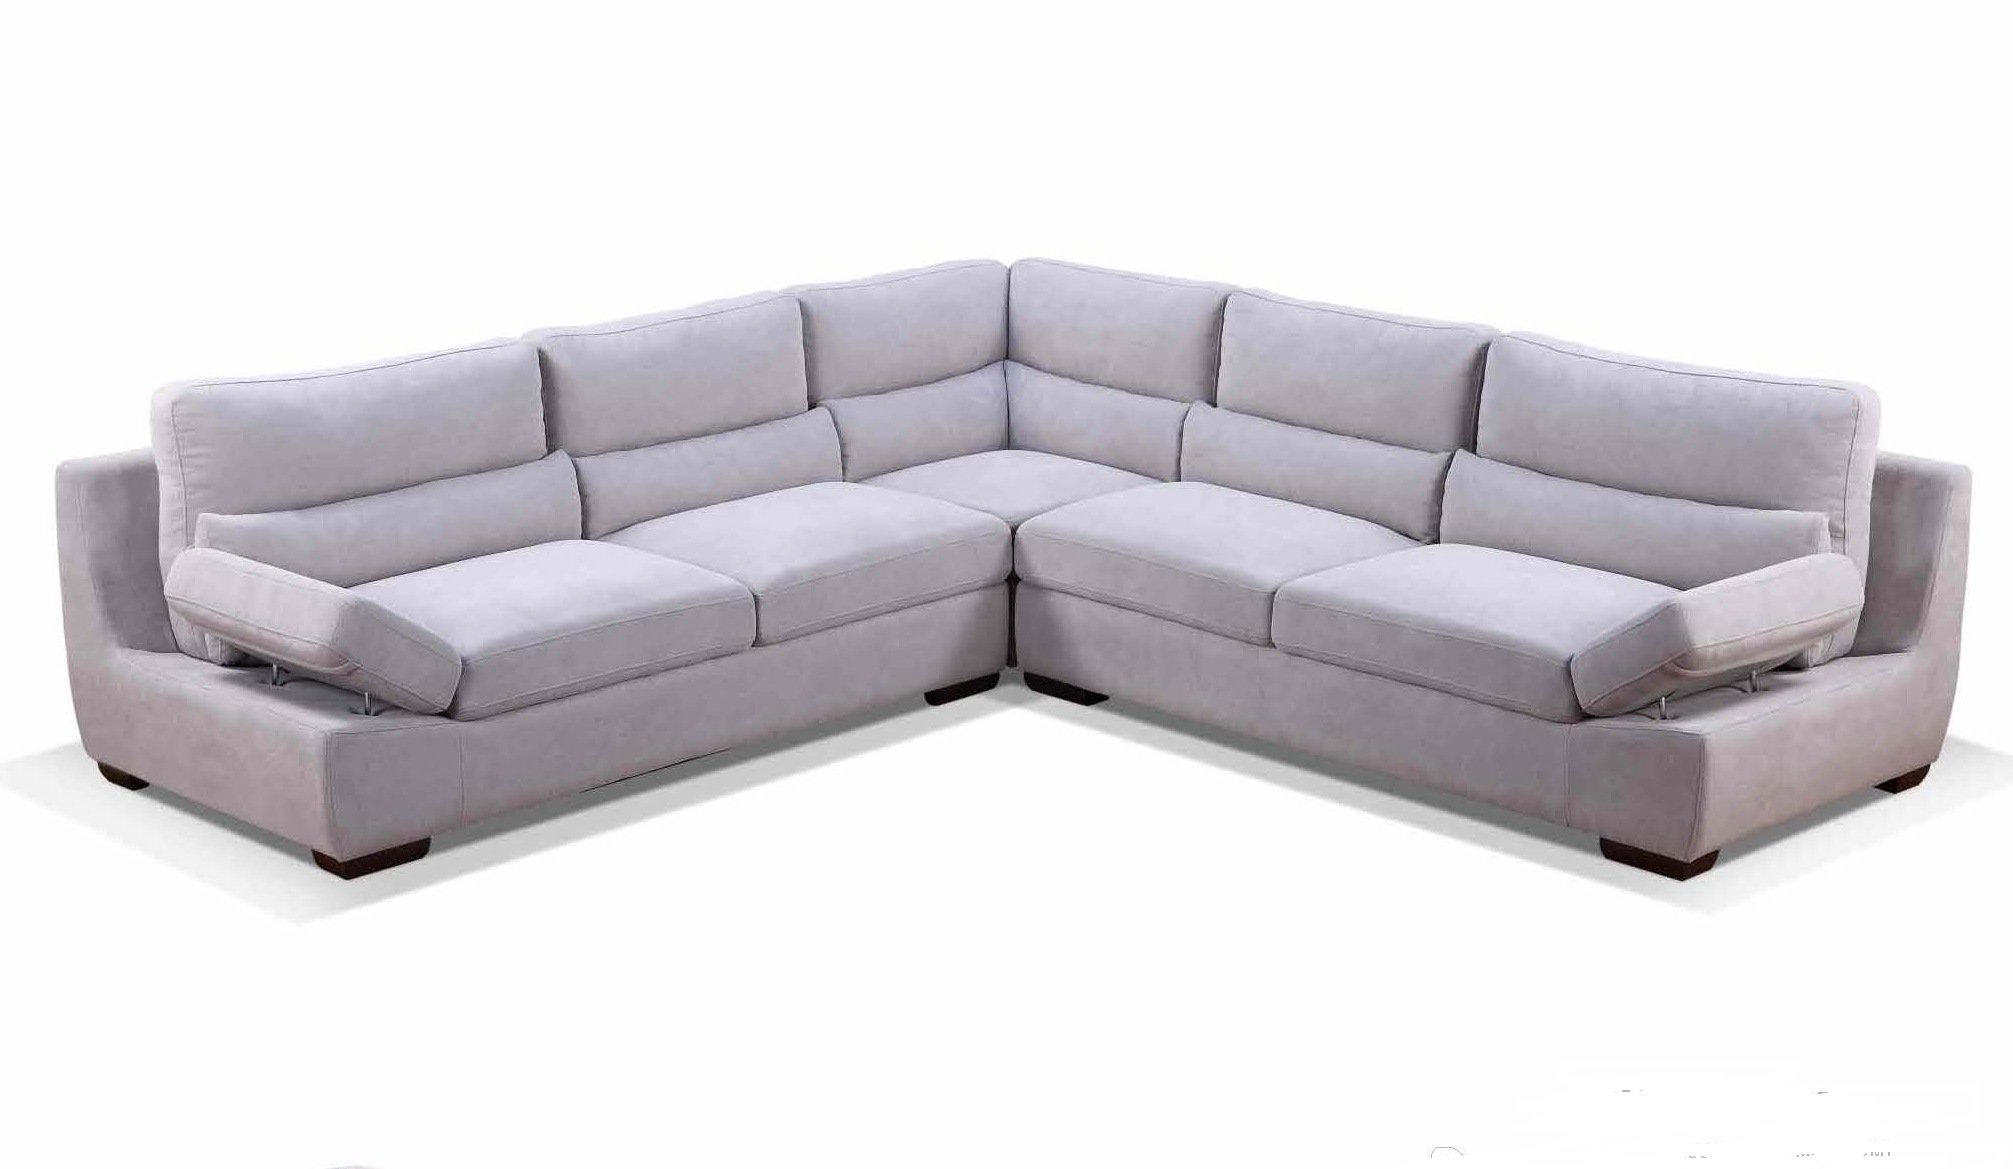 New Italy Simple Living Room Sectional Sofa Design